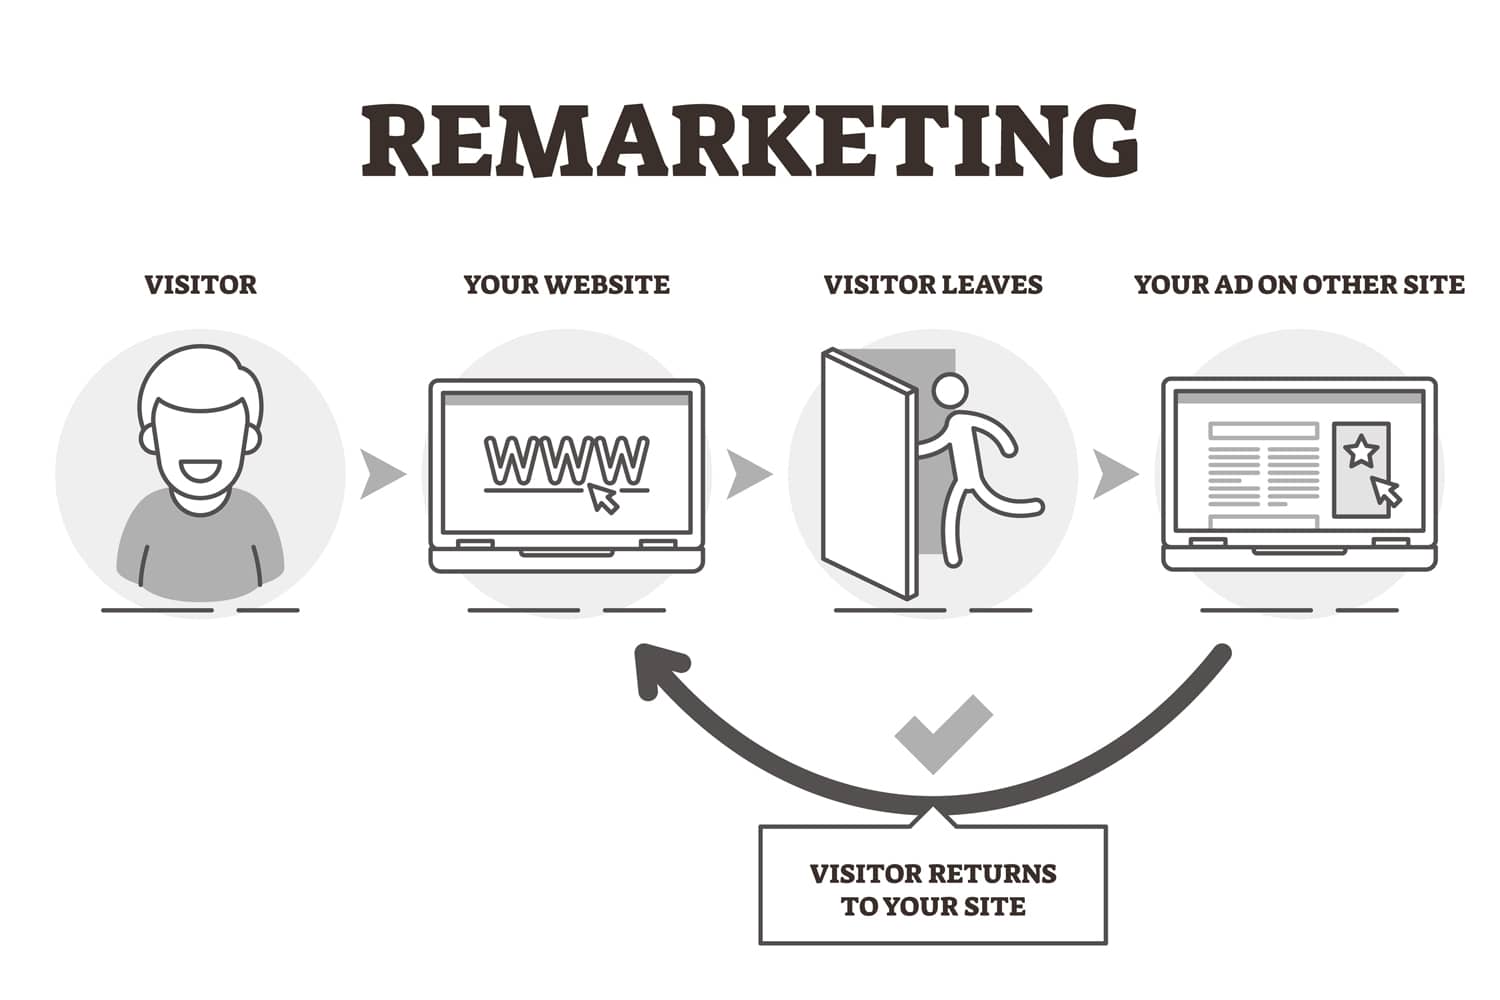 What Is Remarketing In Digital Marketing?